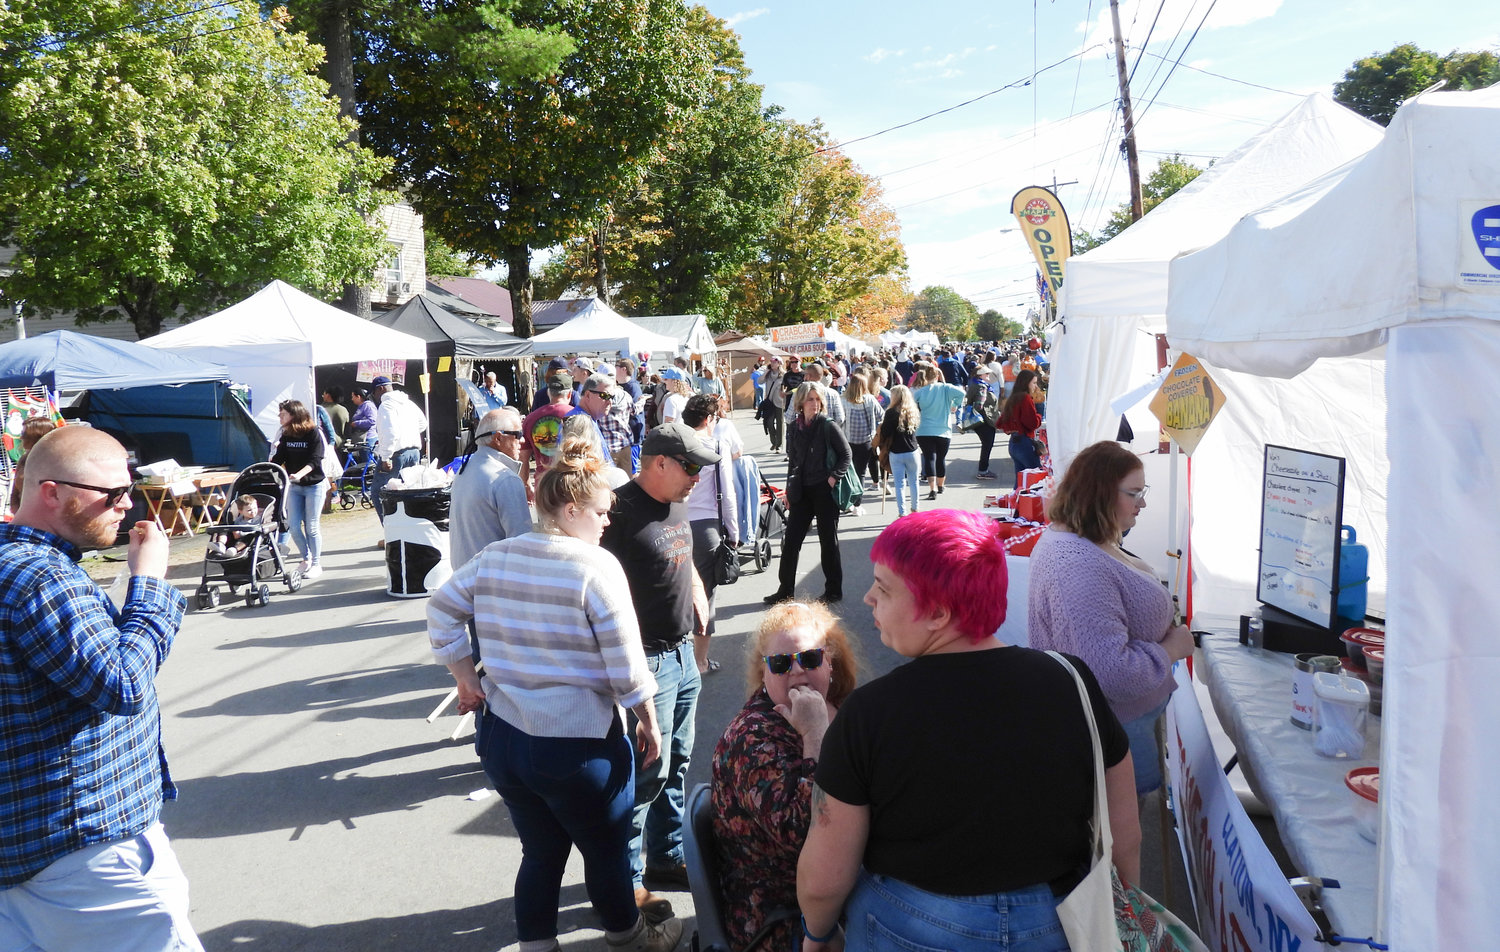 The much-loved Remsen Barn Festival of the Arts made a comeback this year after a leave-of-absence due to COVID-19. The street was absolutely packed full of people browsing and buying handmade goods of all kinds and sampling foods, drinks, and treats just as varied.